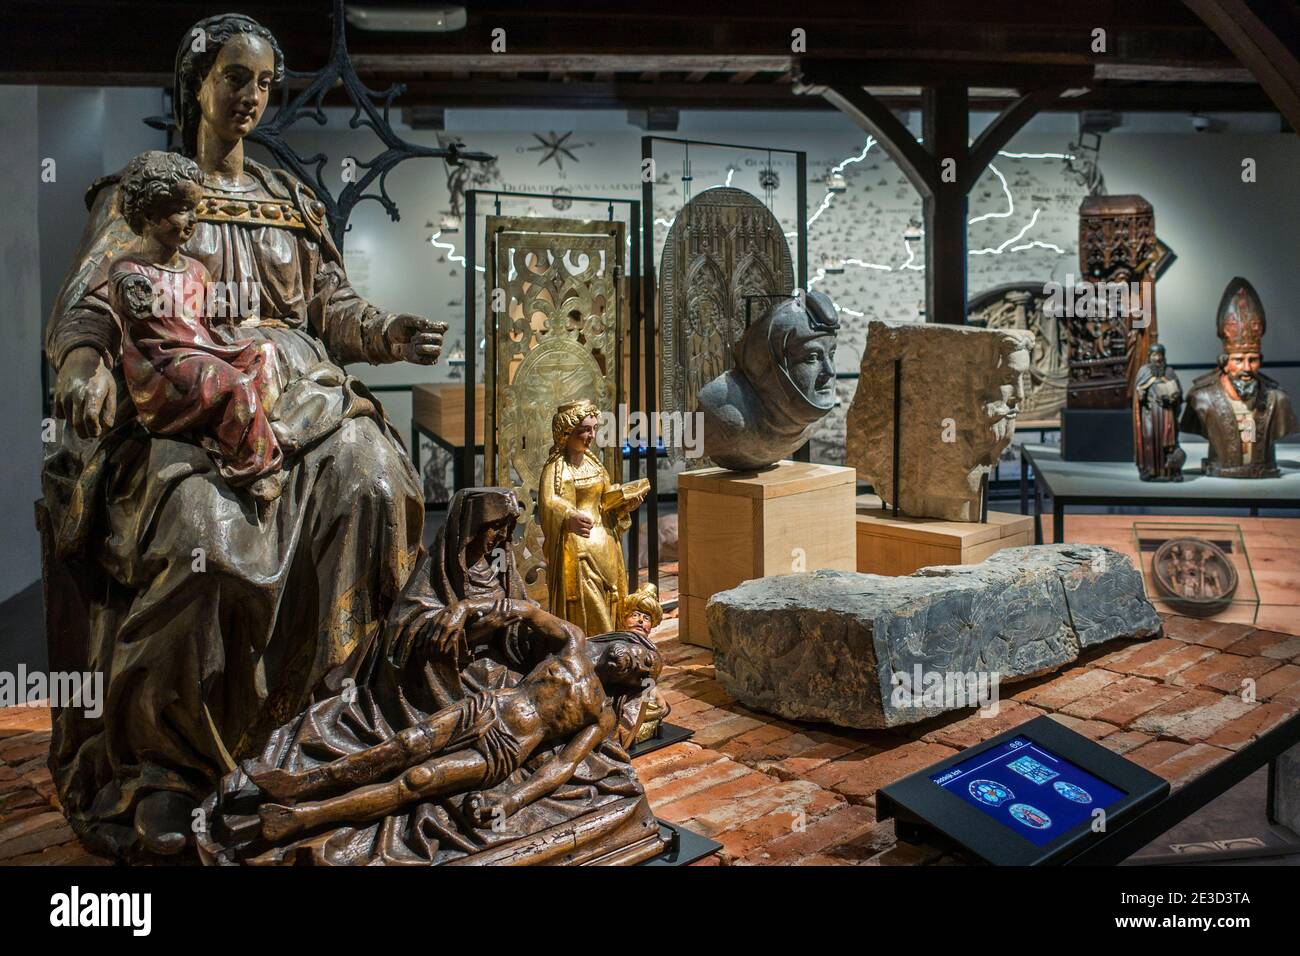 Medieval religious art, statues and sculptures at STAM, Ghent City Museum / Stadsmuseum Gent, East Flanders, Belgium Stock Photo